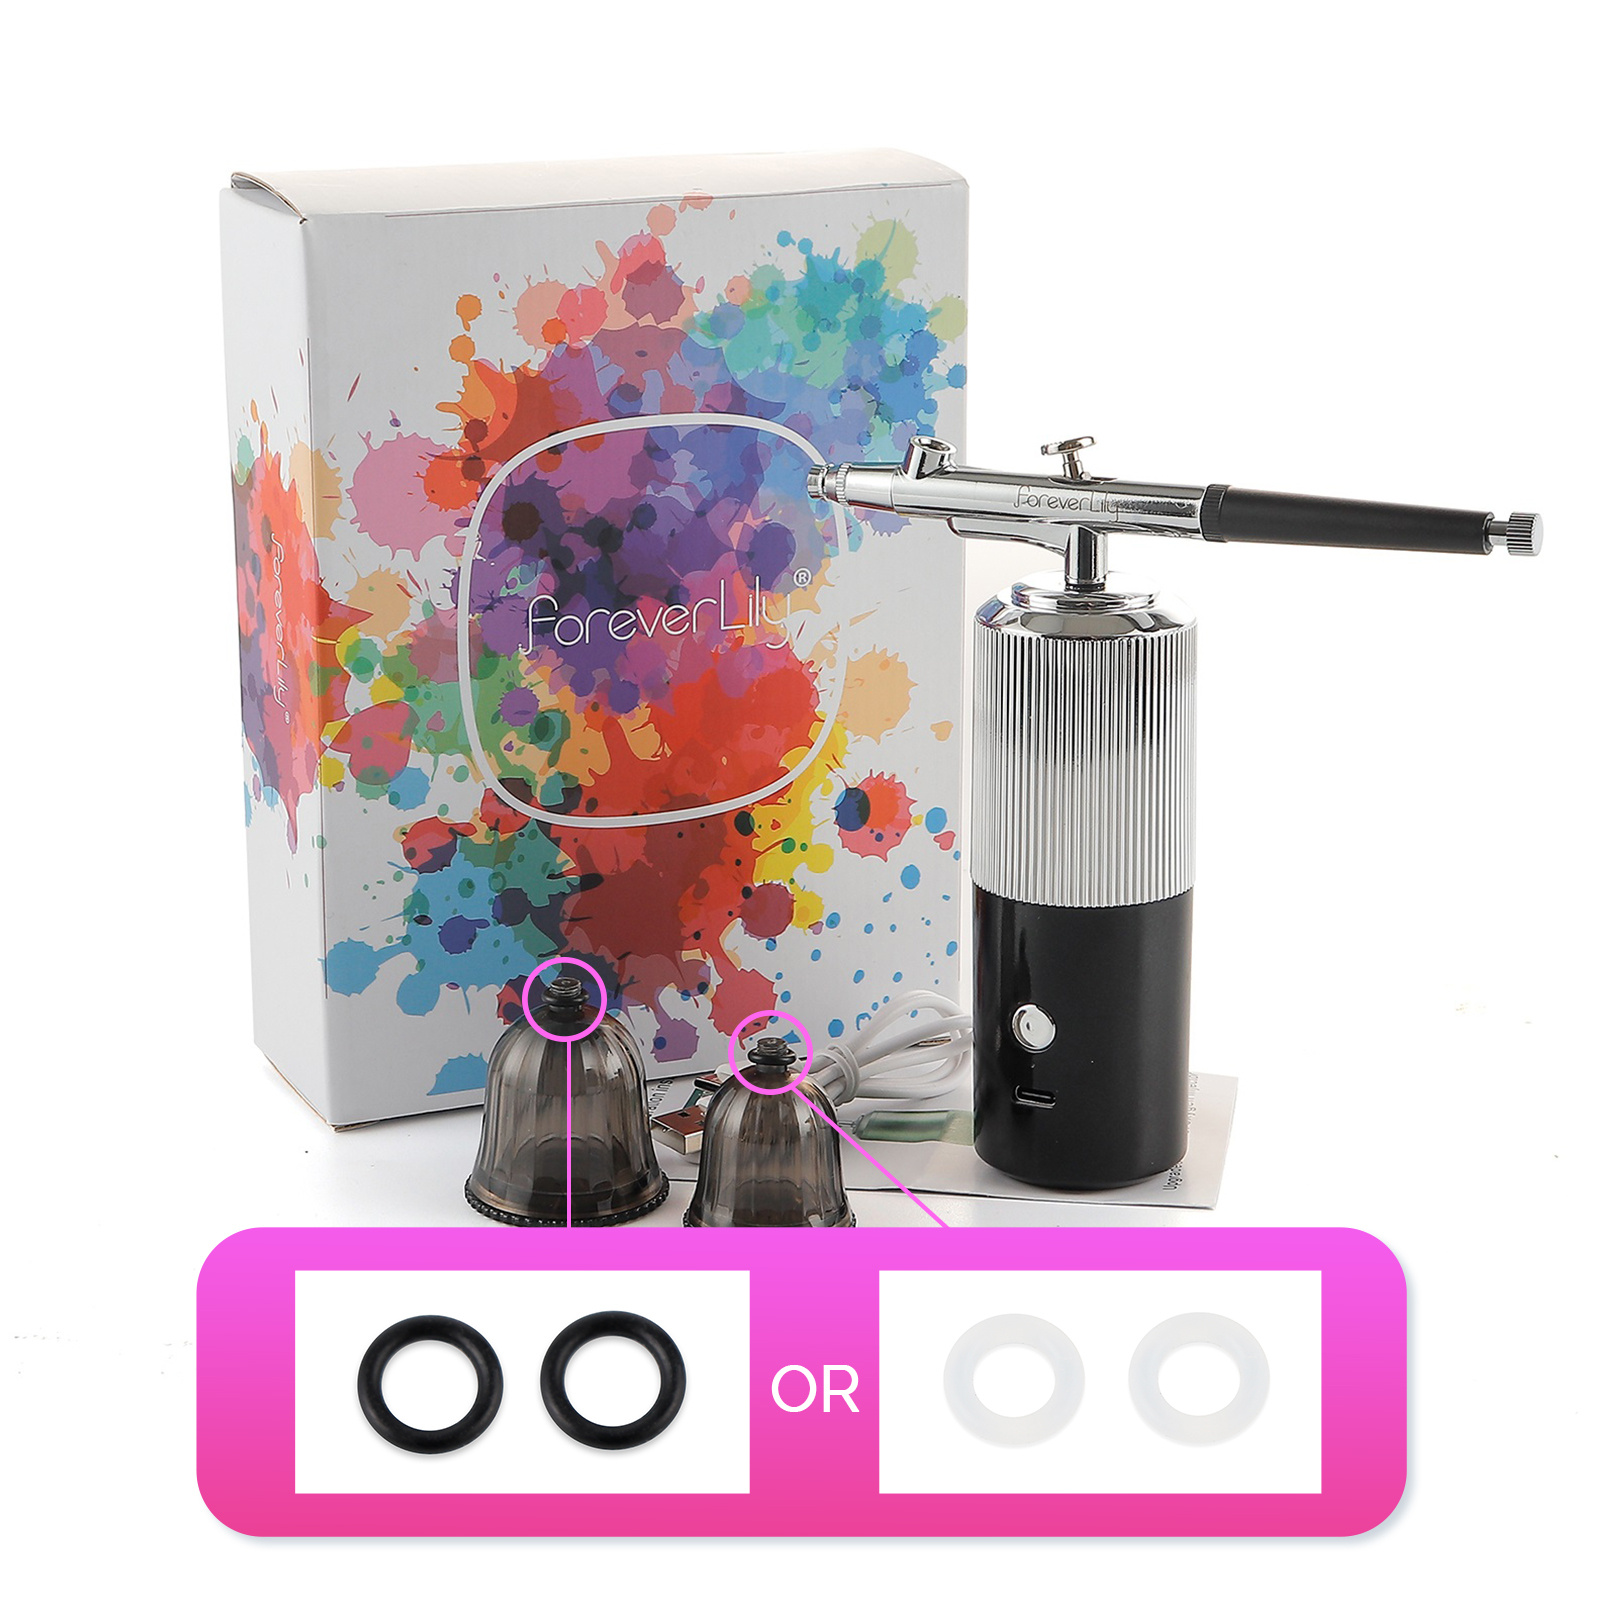 Nozzle Dual Action Airbrush Kit Compressor Portable Oxygen Jet Air Brush  Paint Spray Gun For Nail Art Tattoo Cake Hydration Beauty Tool From  Beauty_newstore, $47.76